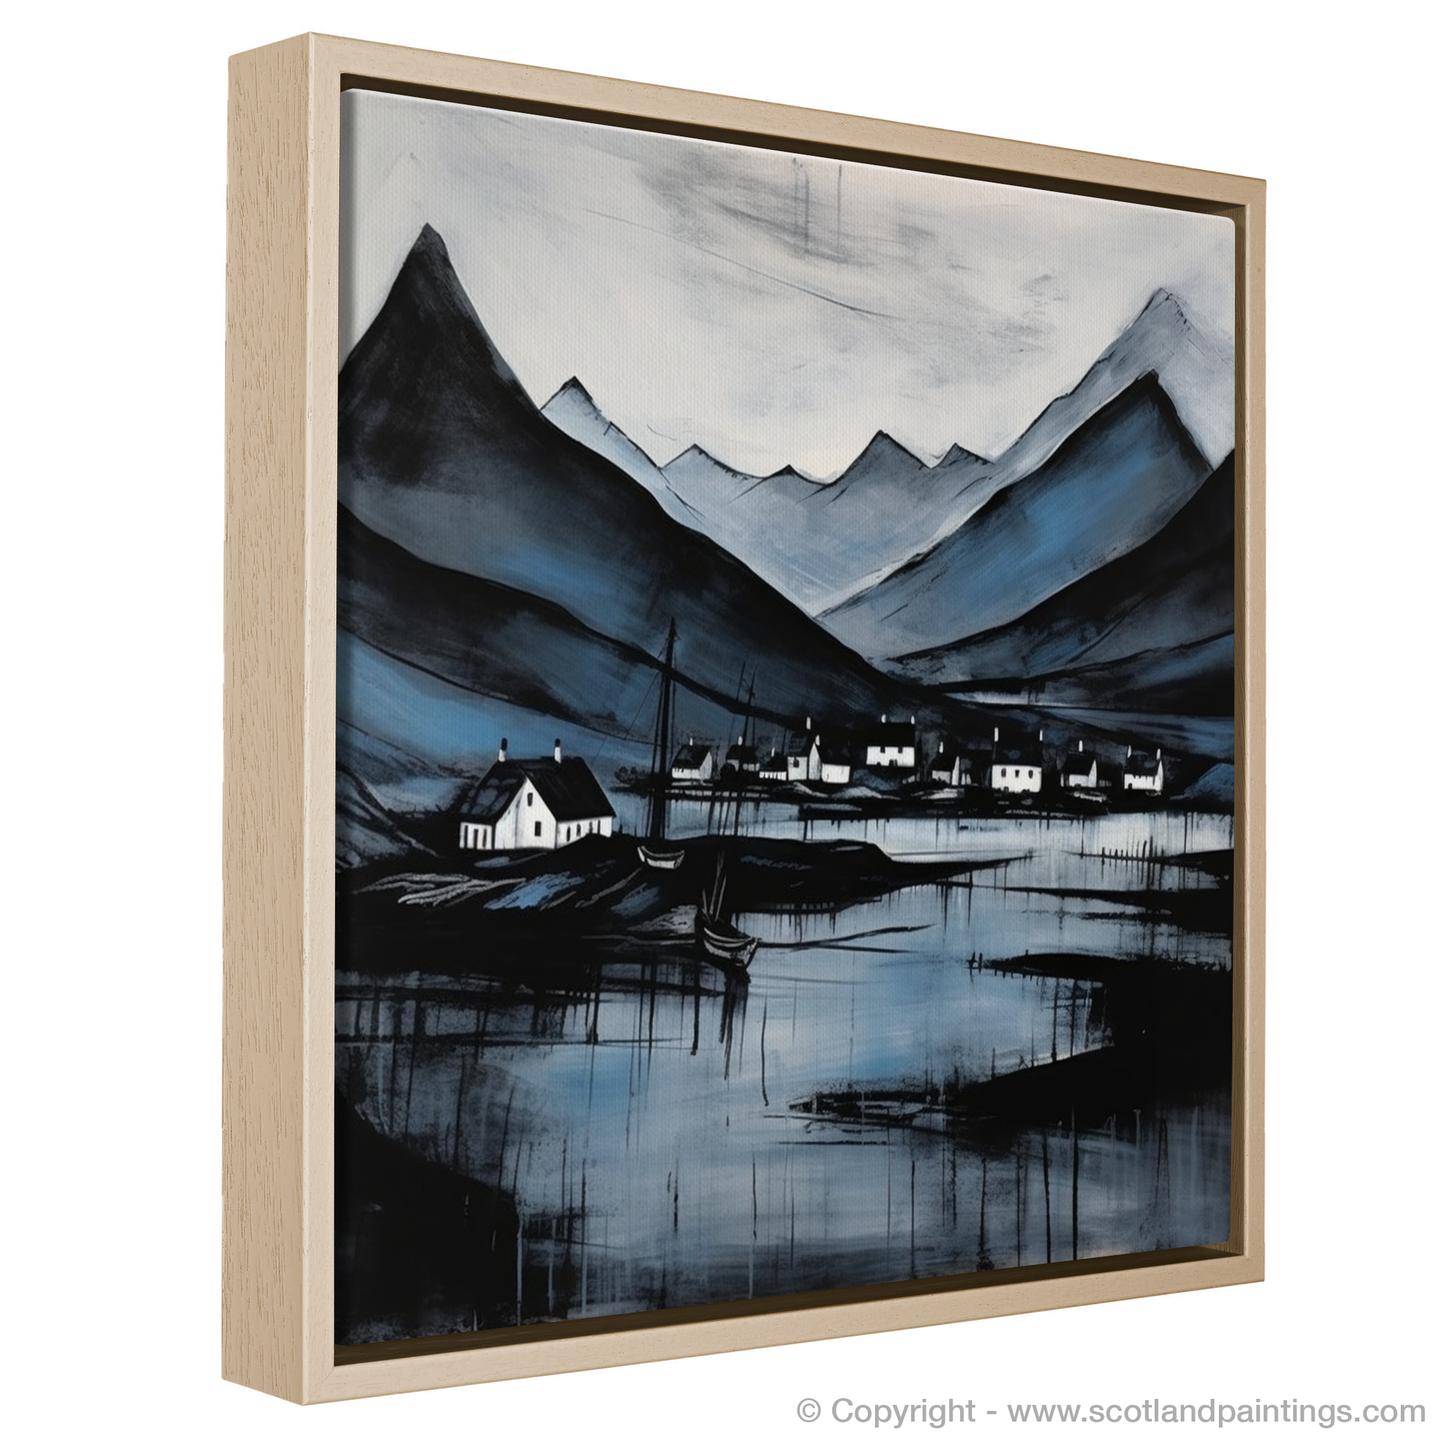 Painting and Art Print of Fort William, Highlands entitled "Highland Solitude: An Illustrative Expression of Fort William".